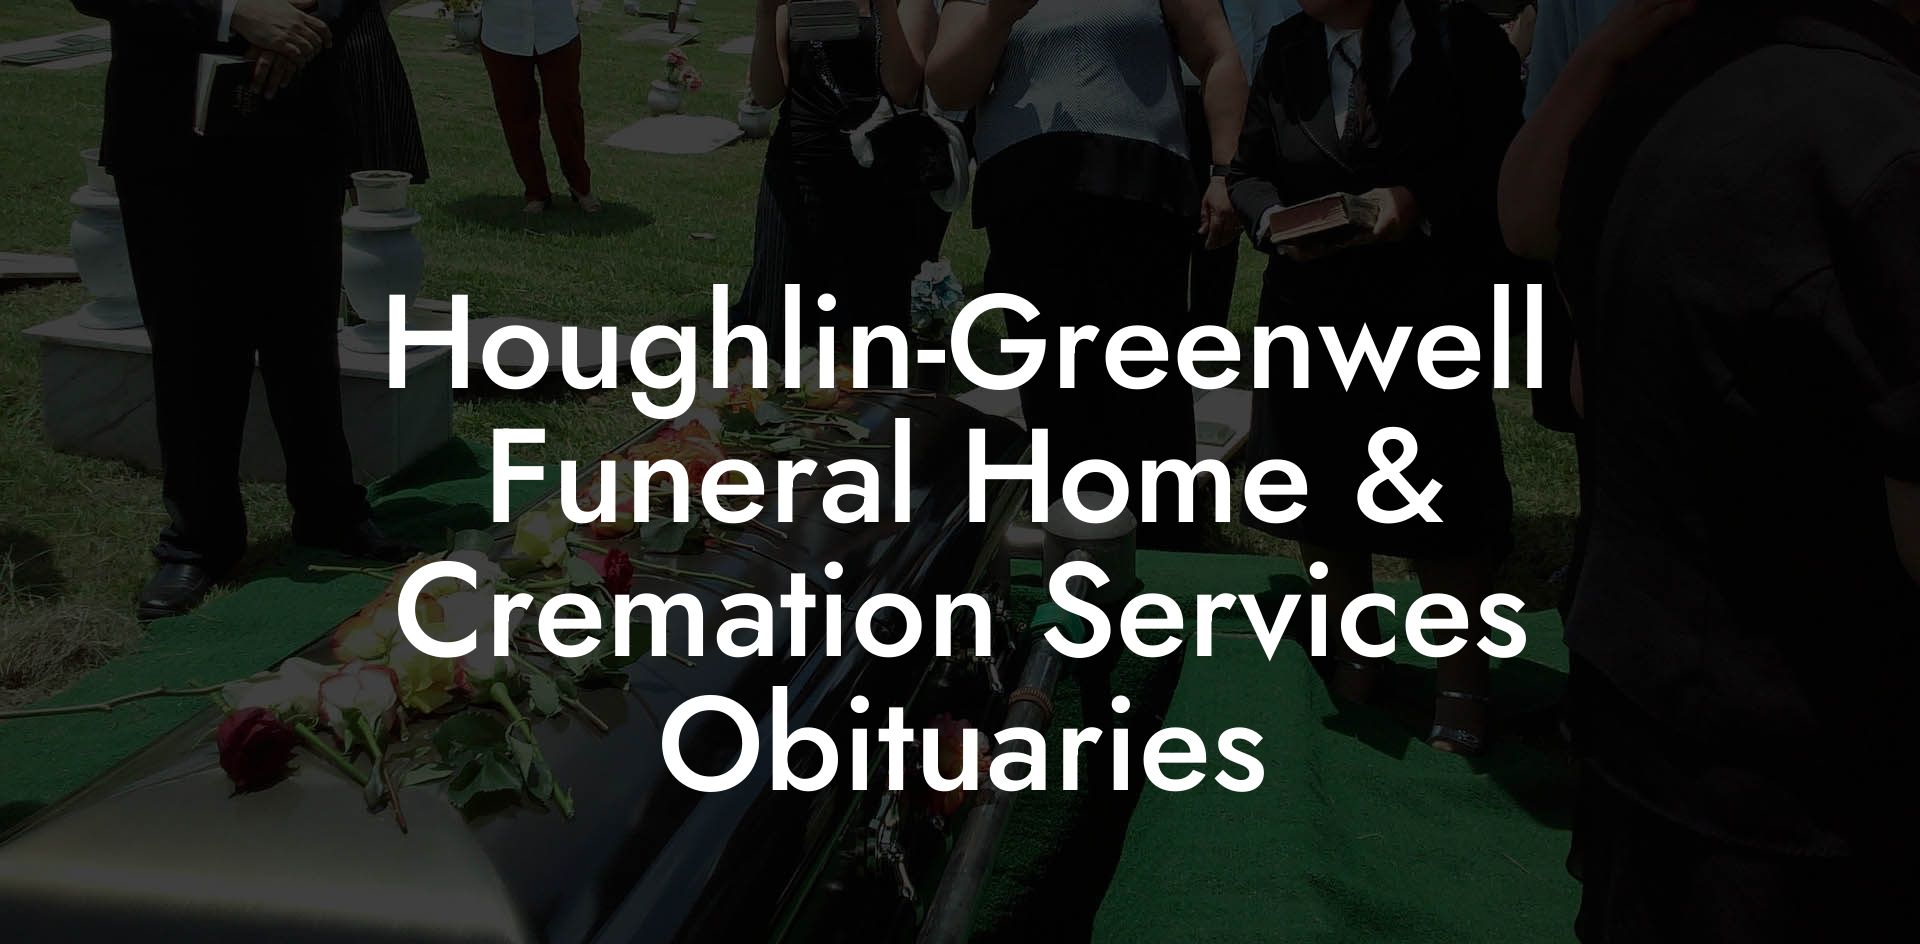 Houghlin-Greenwell Funeral Home & Cremation Services Obituaries